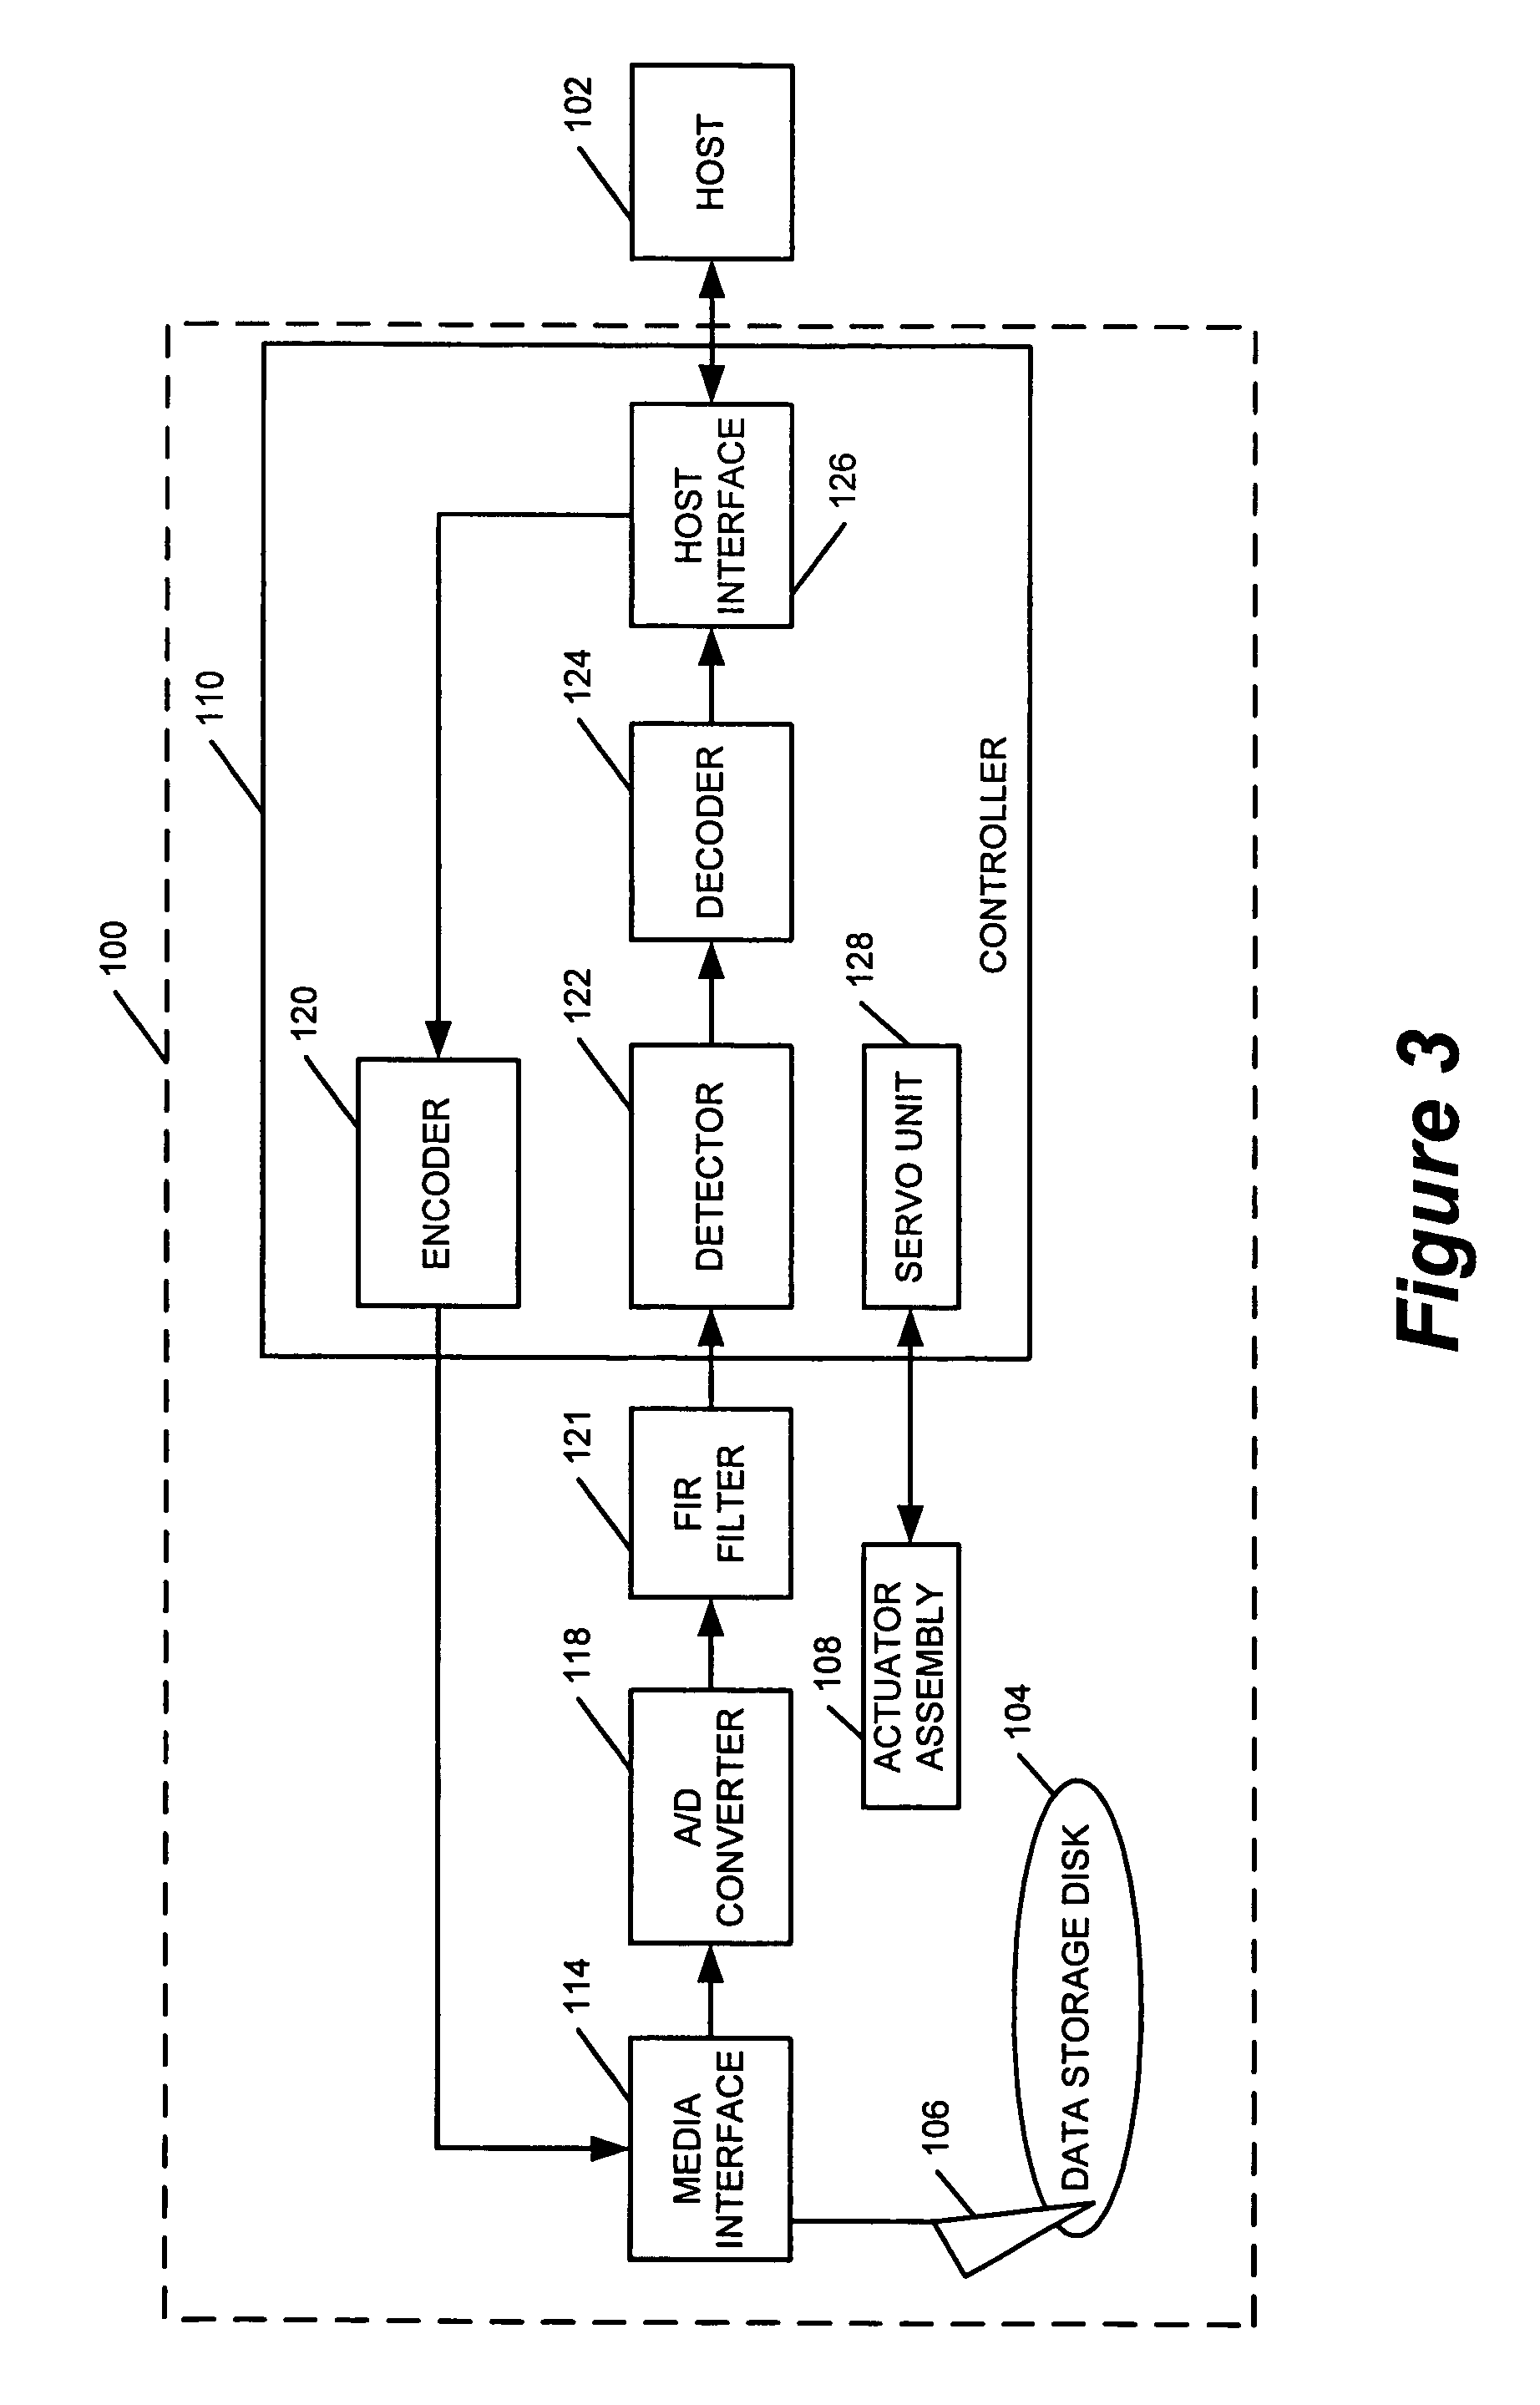 Parallel maximum a posteriori detectors with forward and reverse viterbi operators having different convergence lengths on a sampled data sequence